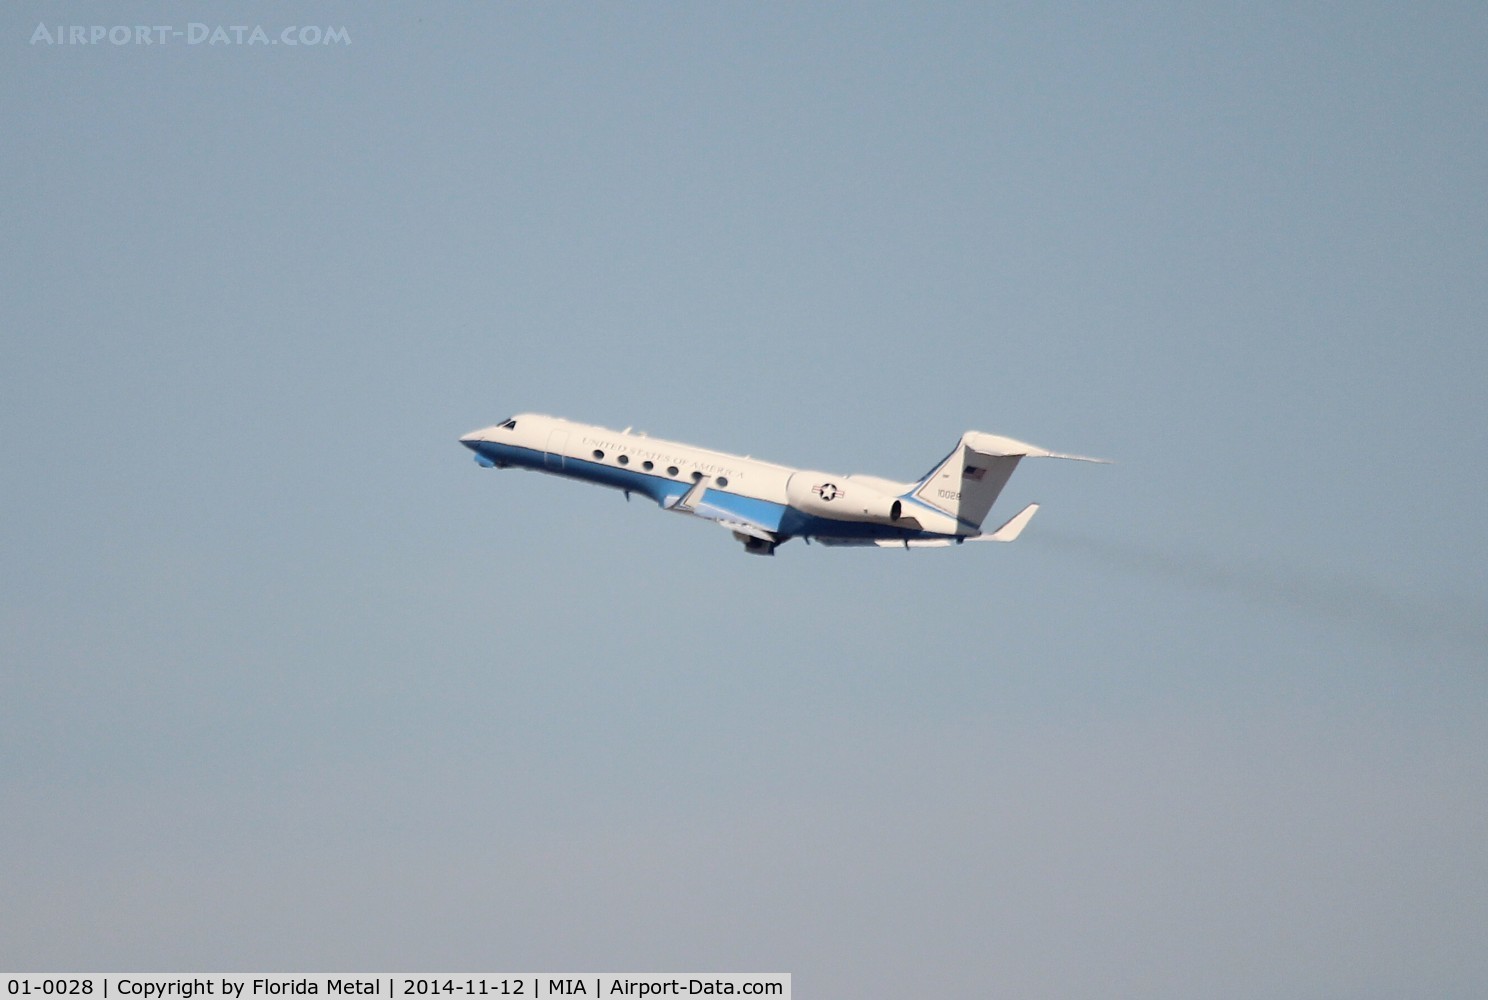 01-0028, 2001 Gulfstream Aerospace VC-37A (Gulfstream V) C/N 620, C-37A departing Miami on the opposite side of the airport